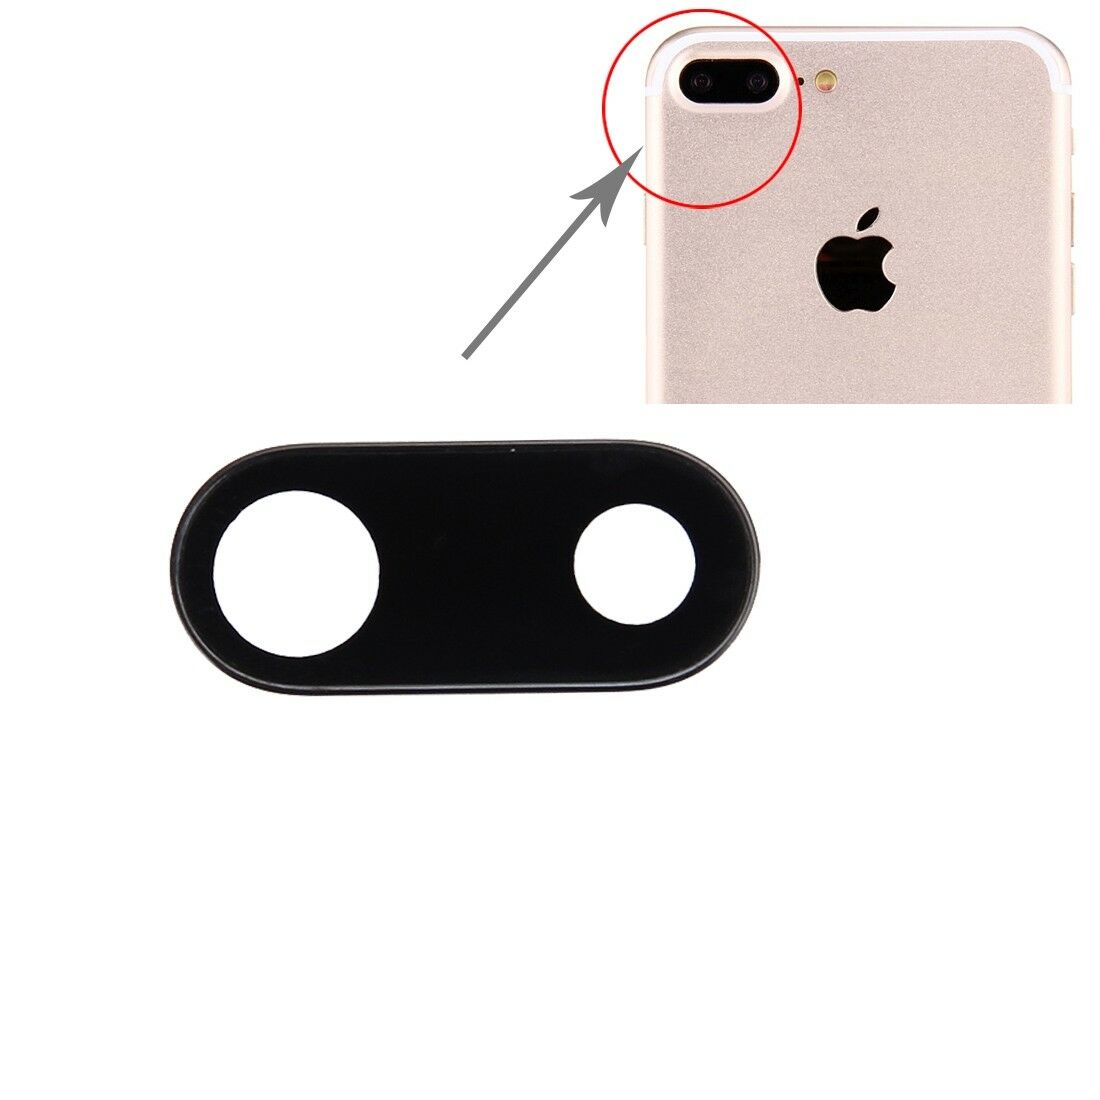 Apple iPhone 7 Plus 5.5" Genuine Rear Back Camera Lens Glass Cover Frame for [product_price] - First Help Tech